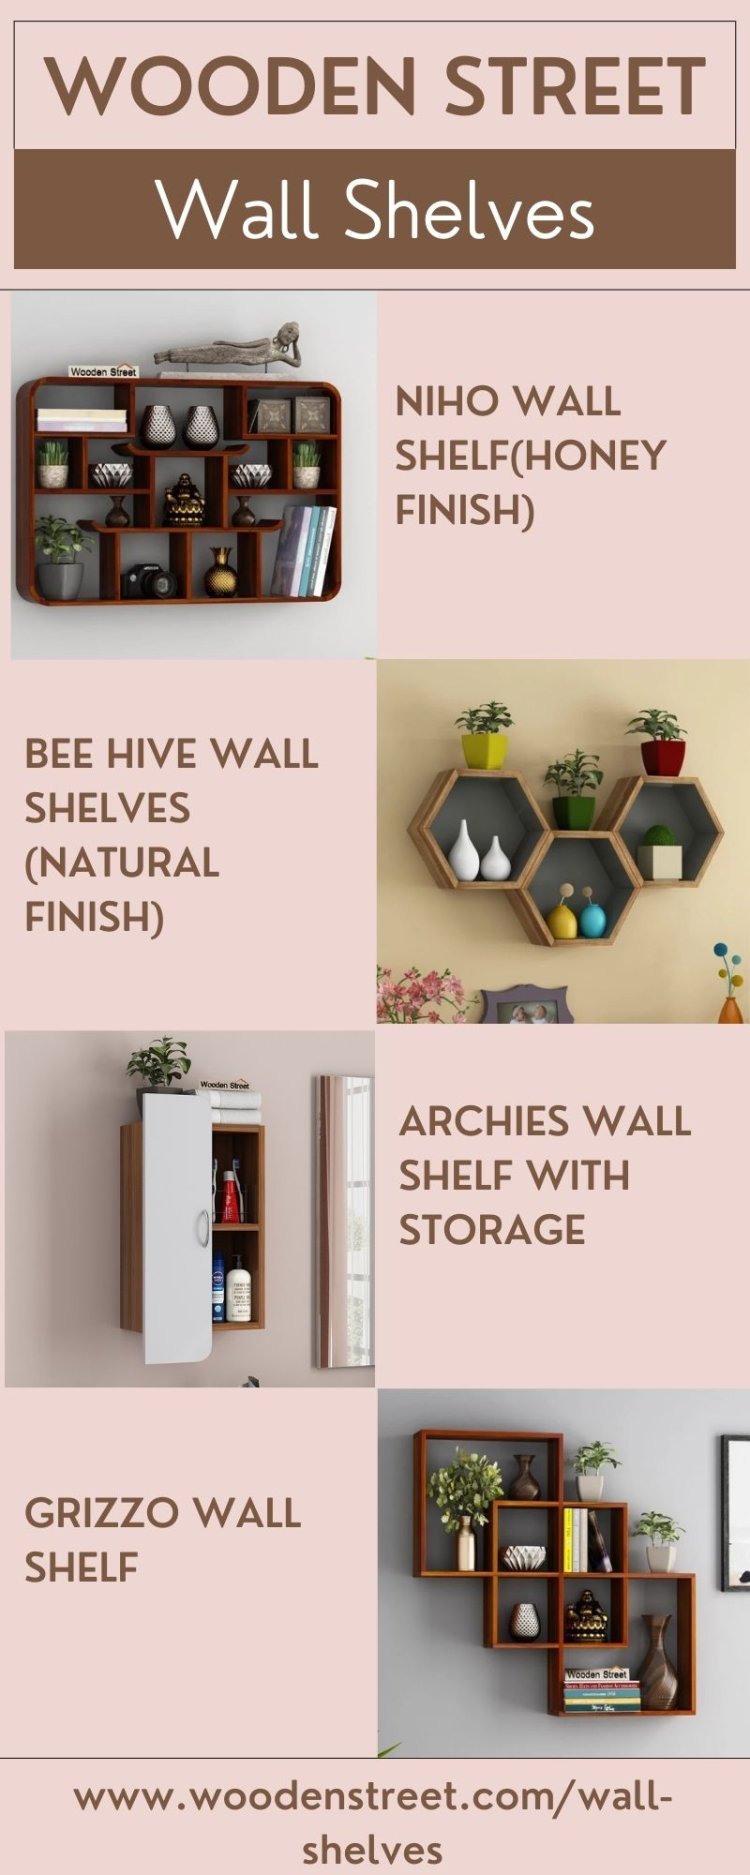 Wall Shelves: The Versatile Solution for Every Room